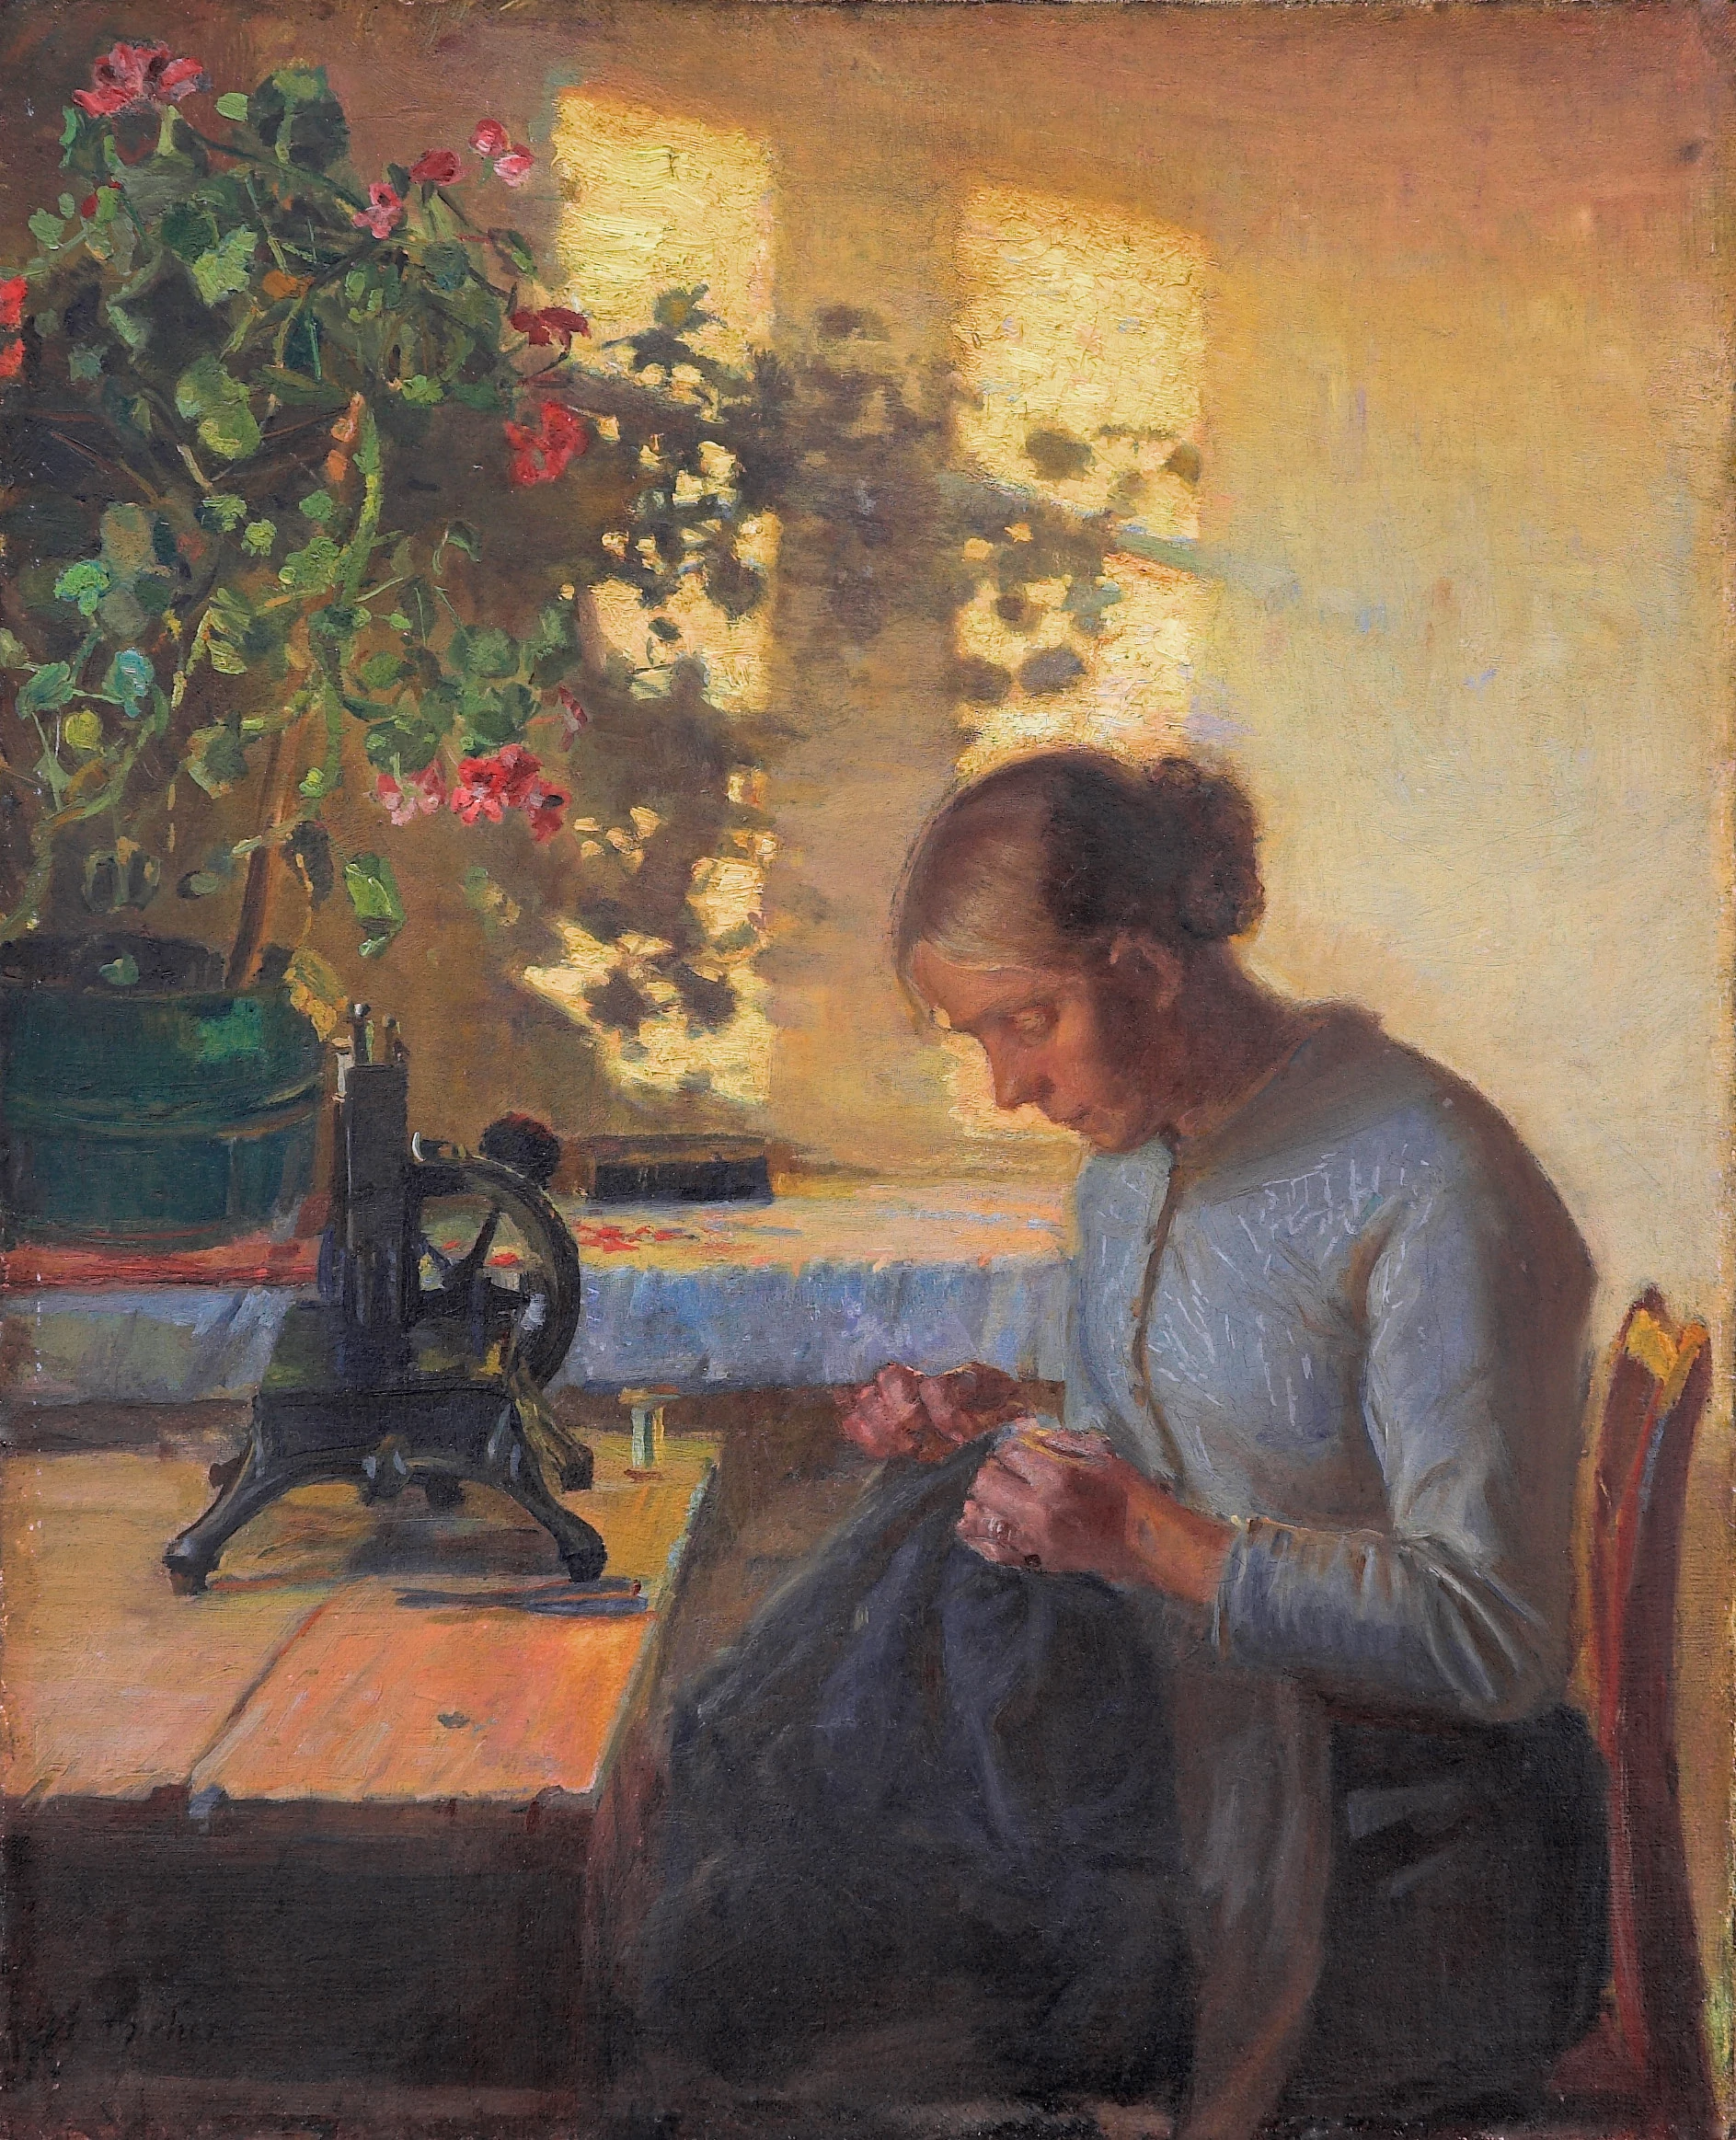 Fisherman's wife sewing, Anna Ancher